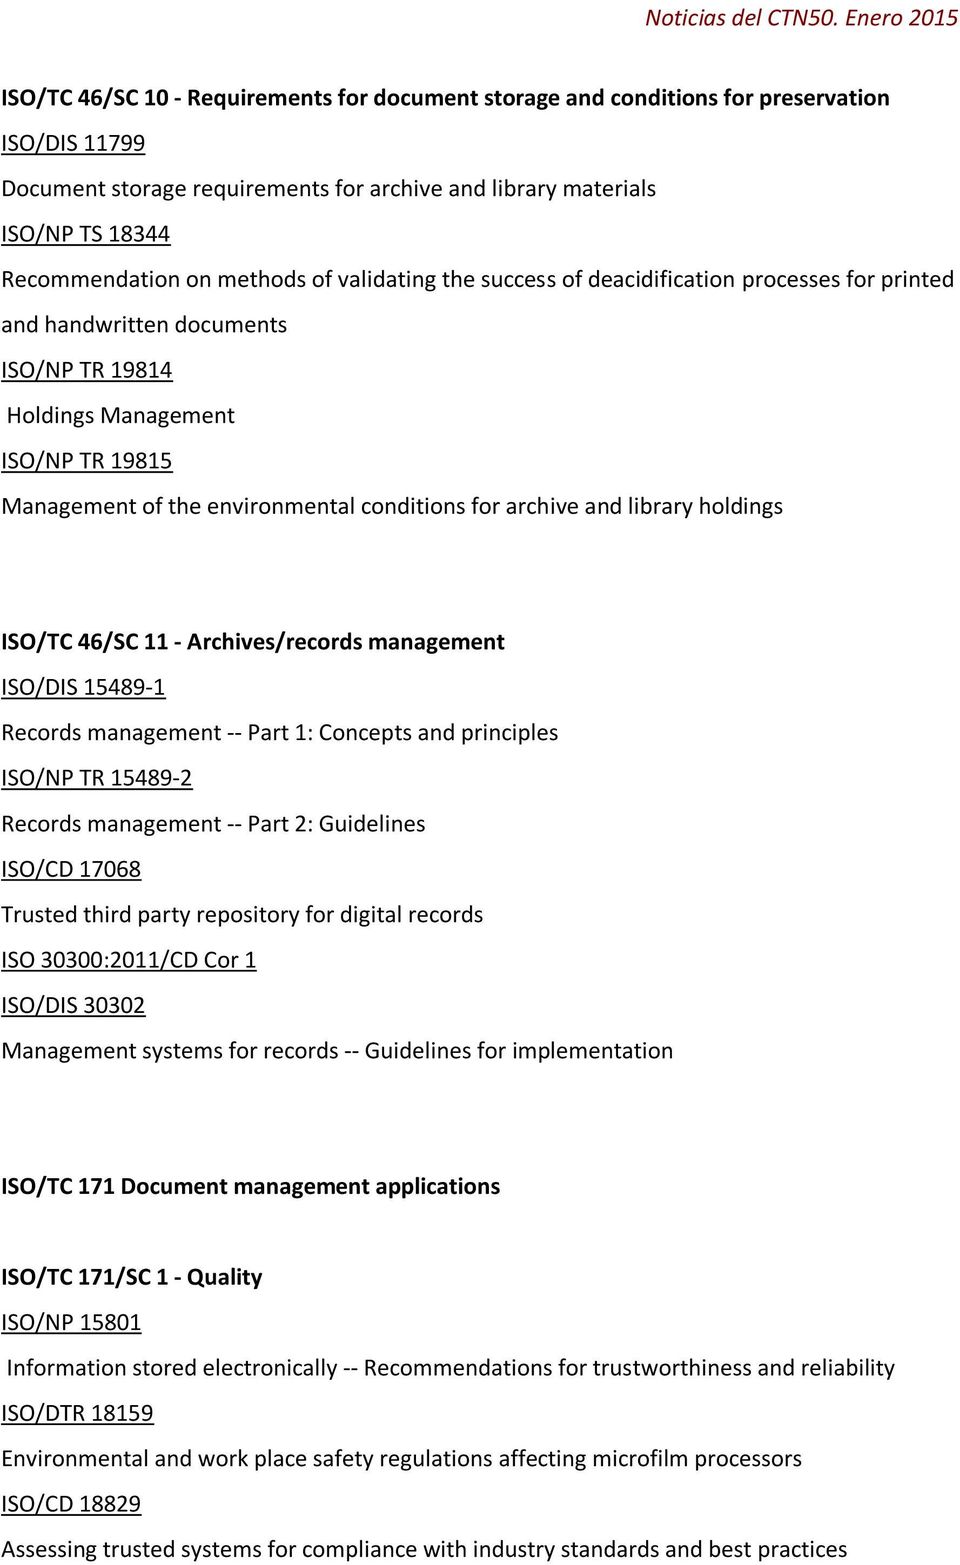 archive and library holdings ISO/TC 46/SC 11 - Archives/records management ISO/DIS 15489-1 Records management -- Part 1: Concepts and principles ISO/NP TR 15489-2 Records management -- Part 2: